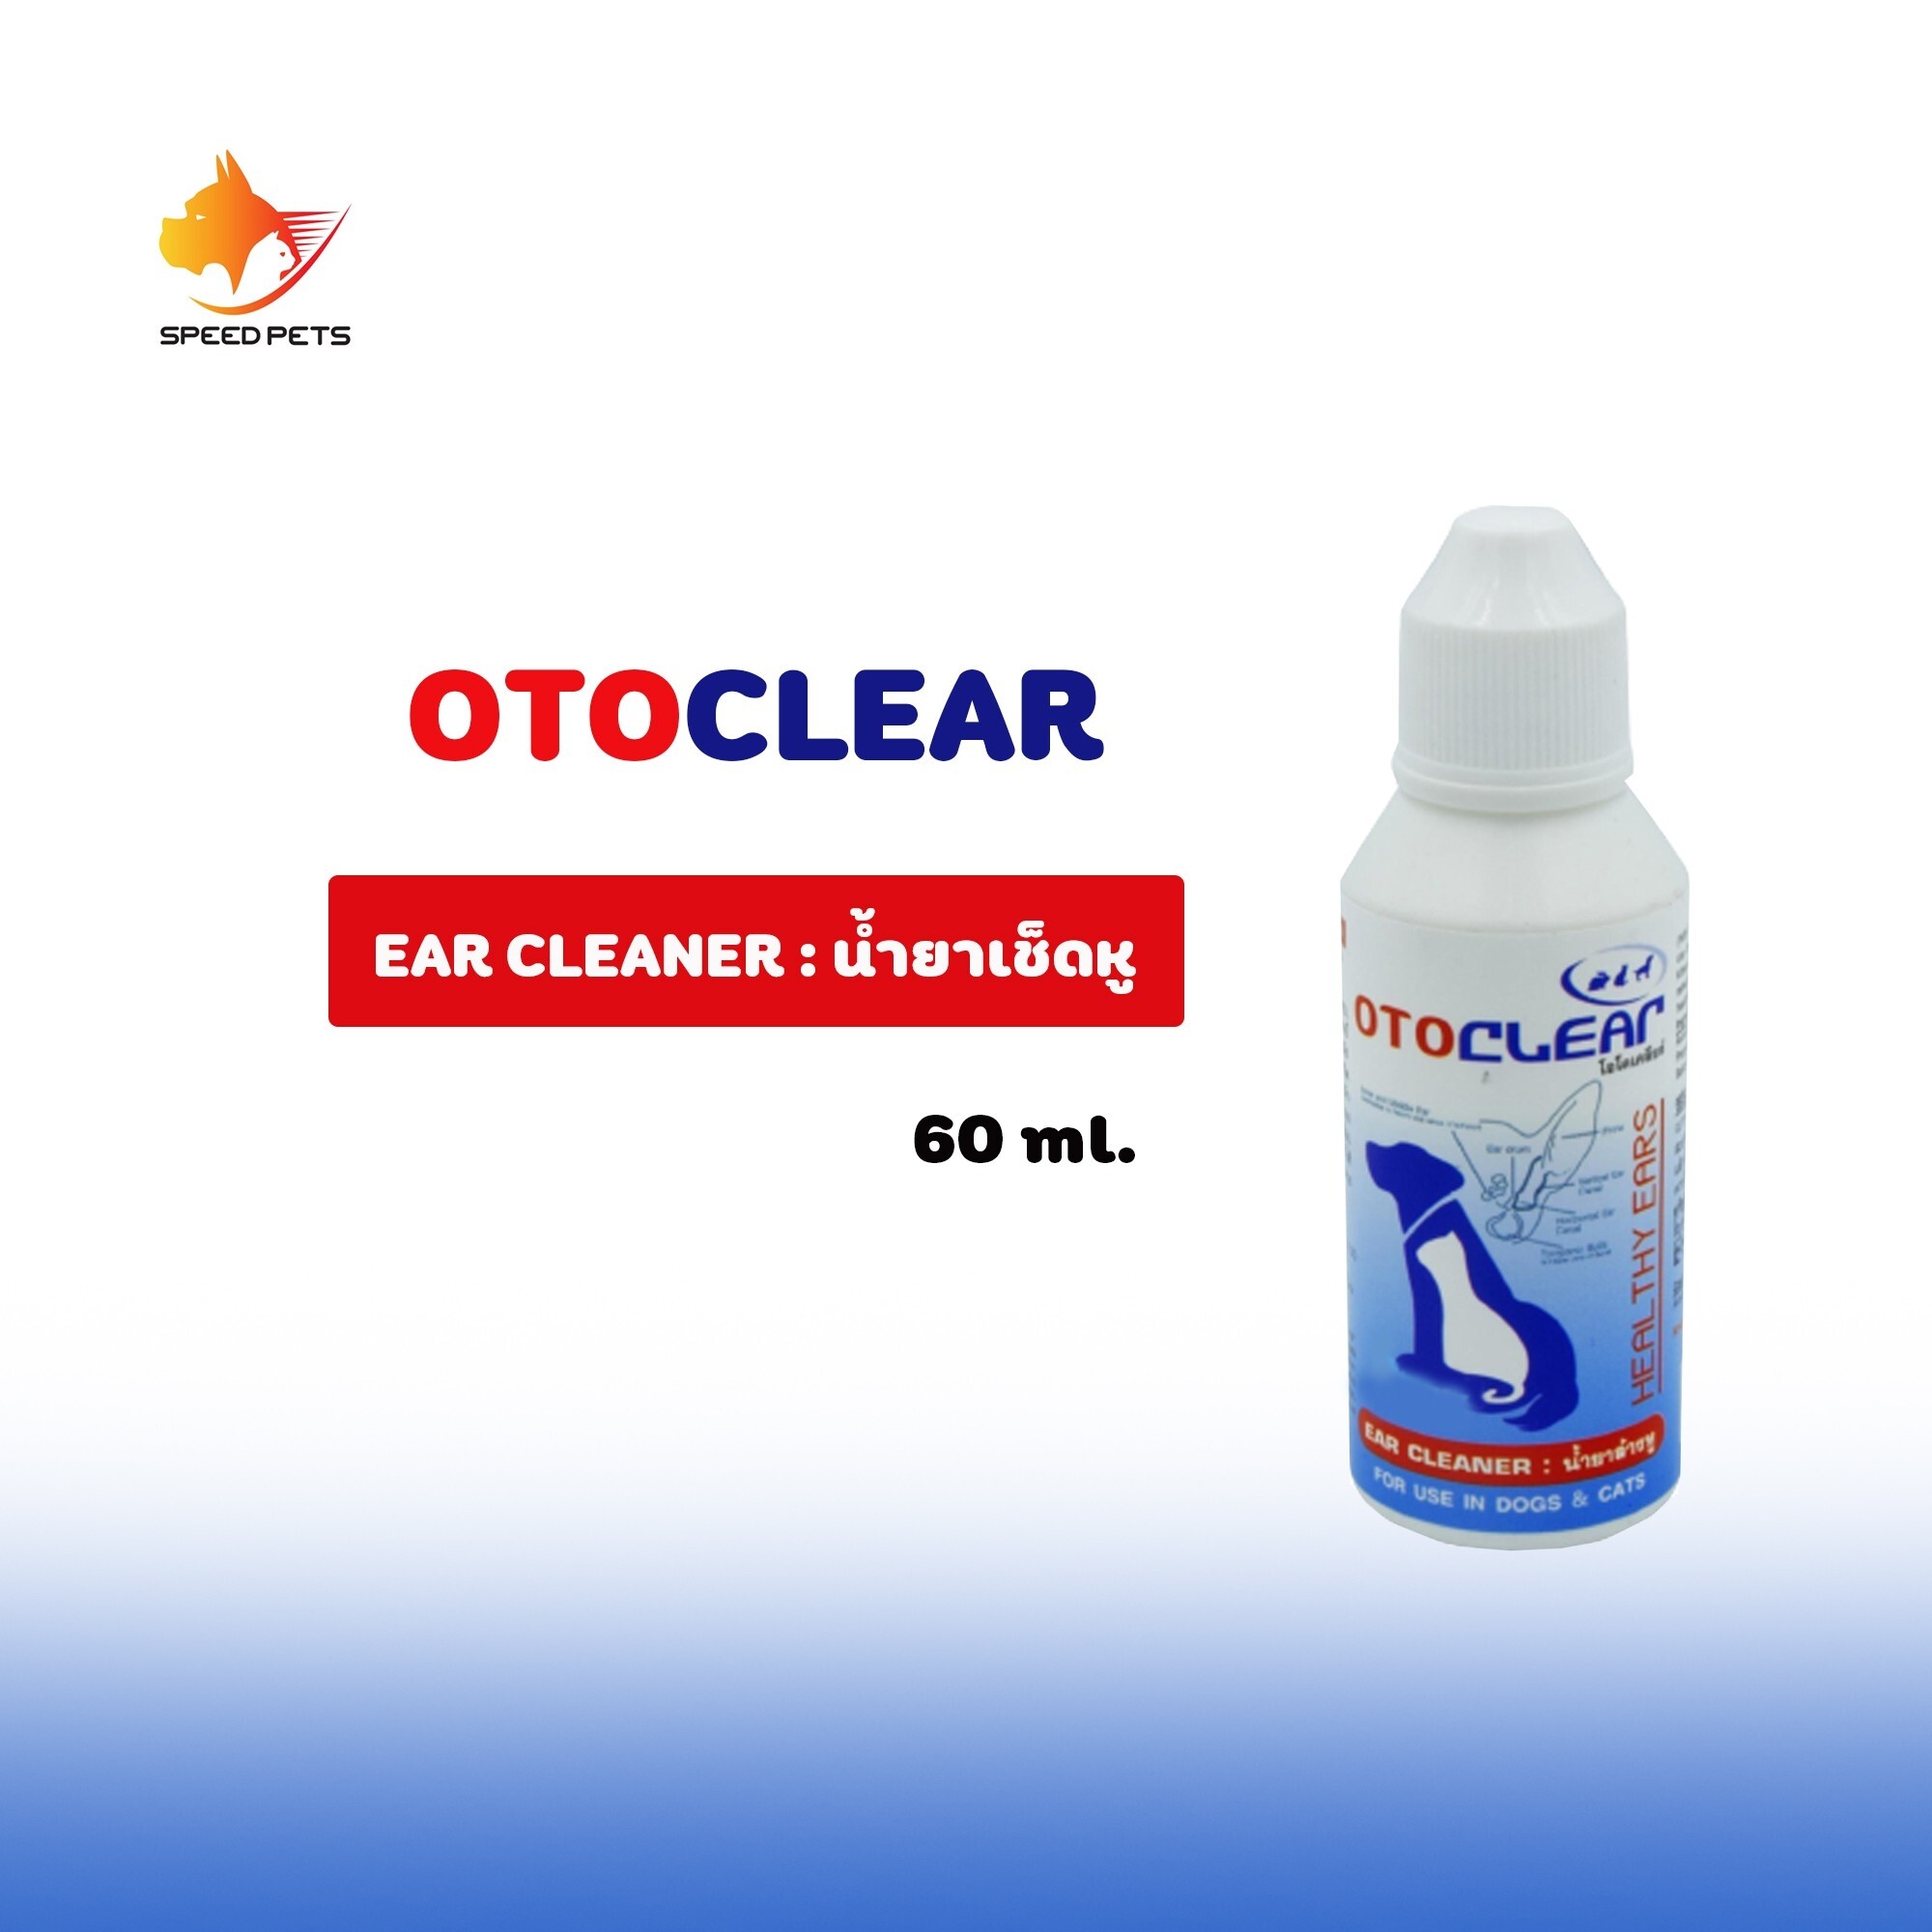 Otoclear ear cleaner for dogs and cats 60ml น้ำยาล้างหู ล้างช่องหู สุนัข แมว ขนาด 60cc